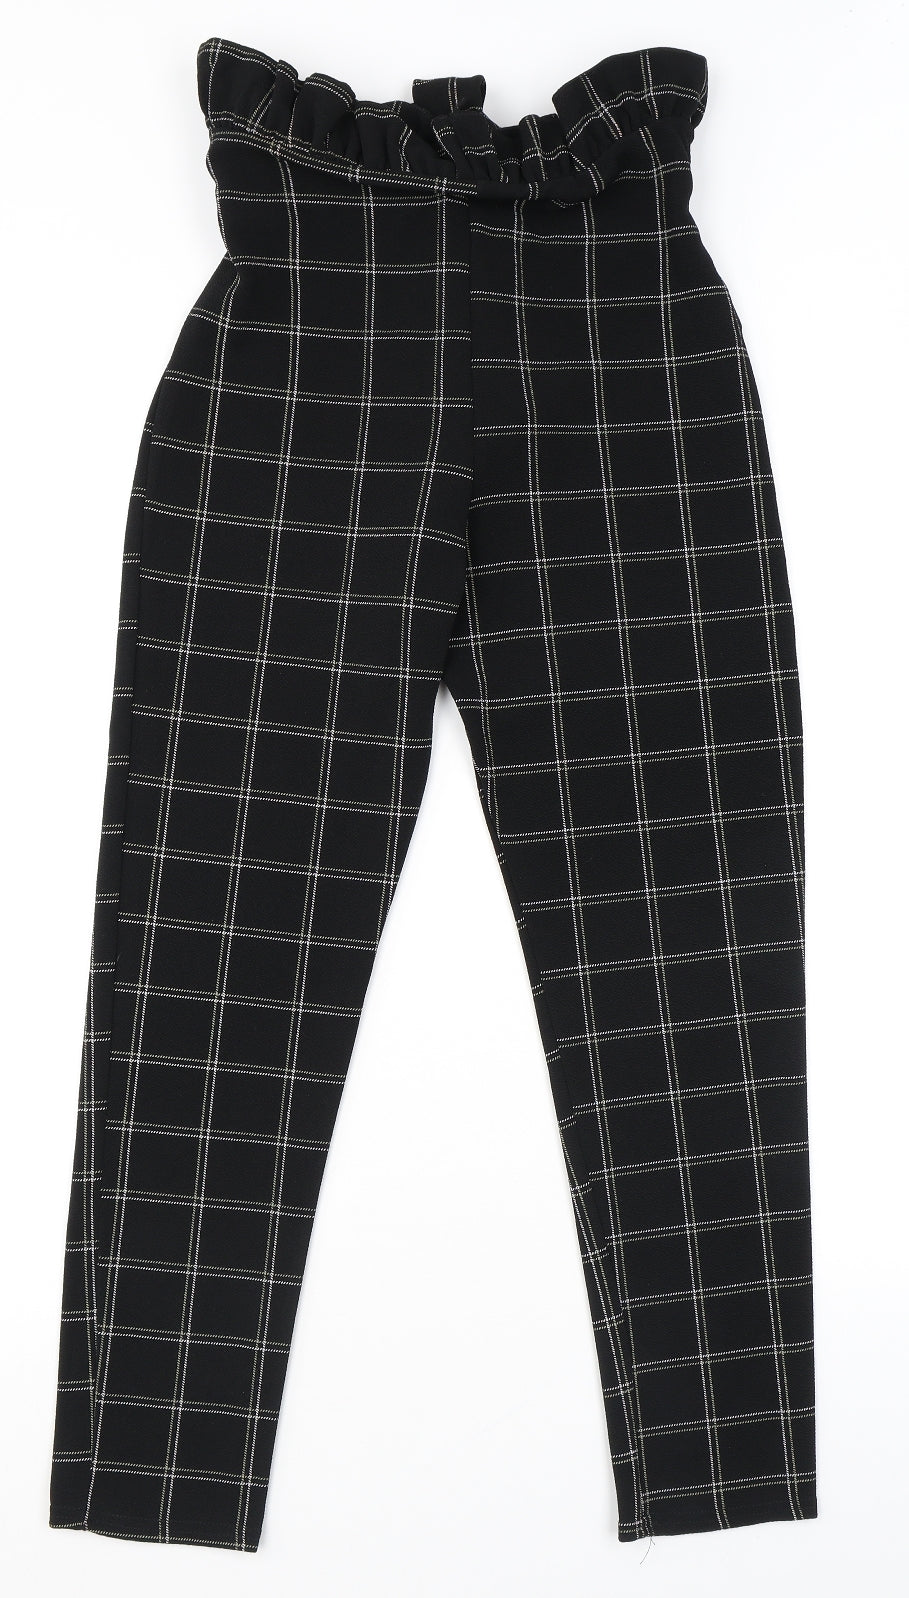 PRETTYLITTLETHING Womens Black Check Polyester Trousers Size 12 L26 in Regular - Paperbag Waist Belted